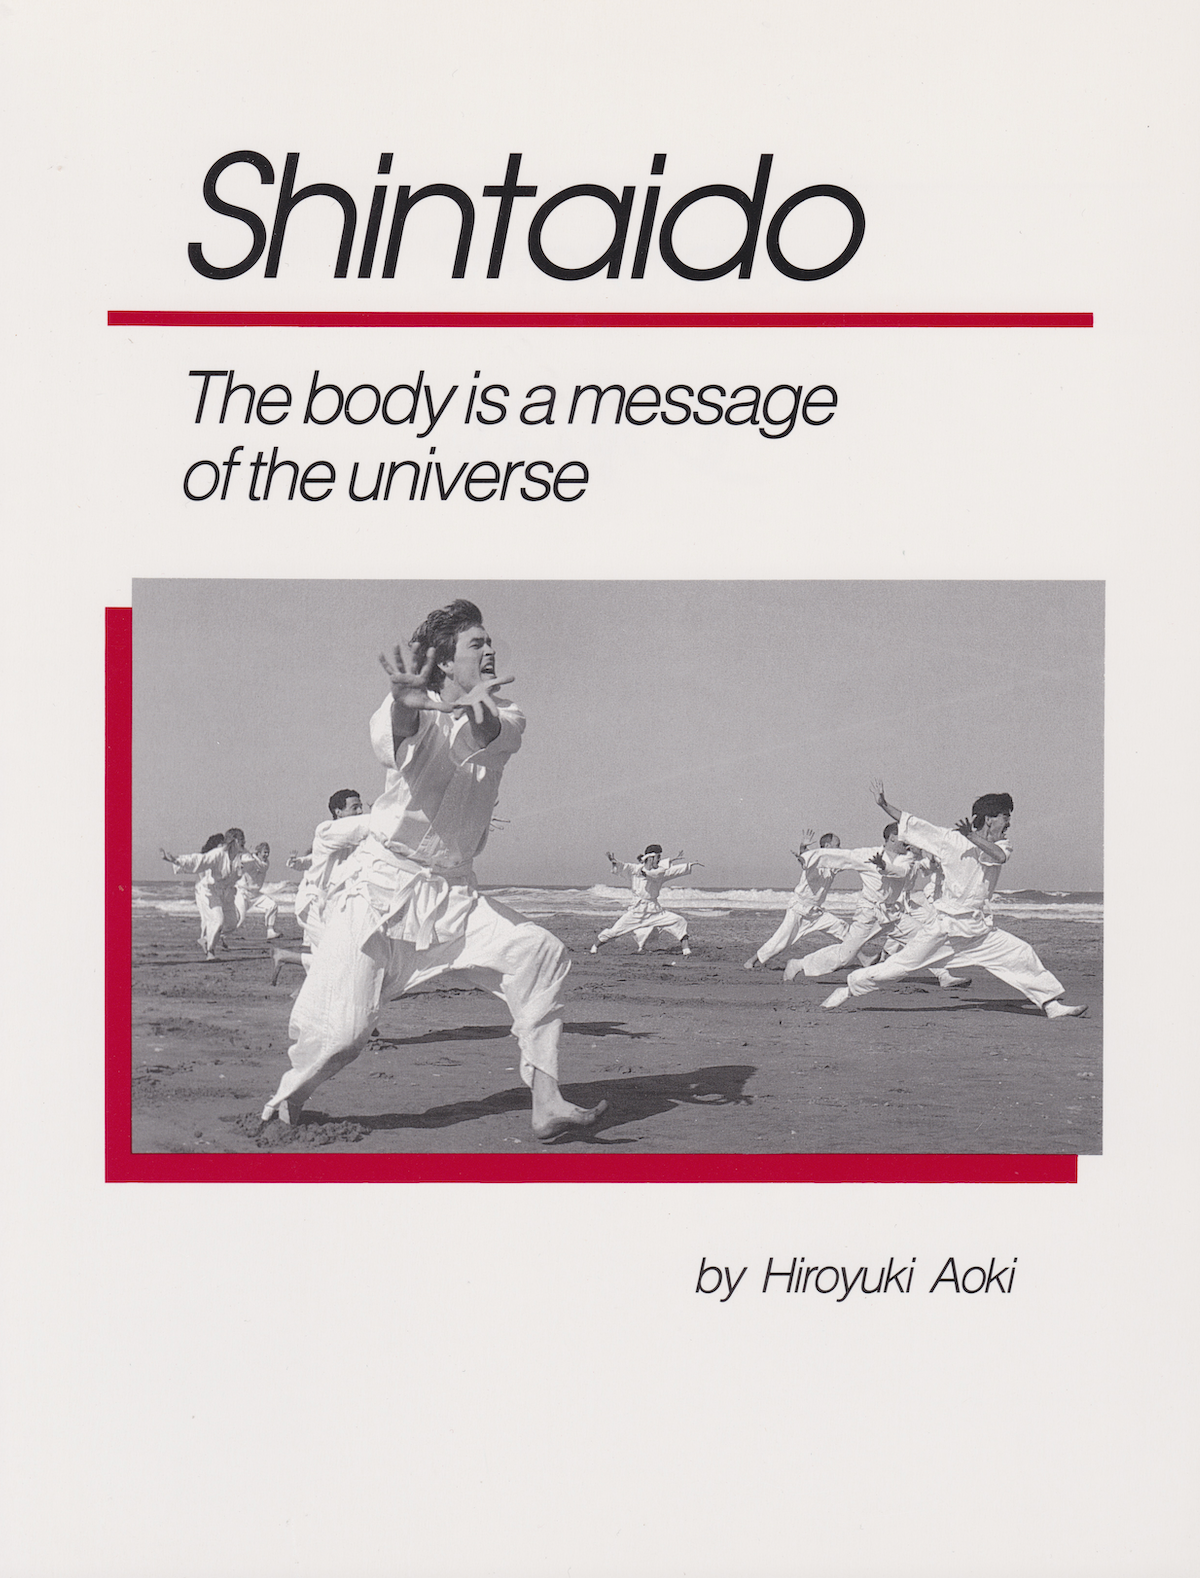 Shintaido: The Body is a Message of the Universe Book by Hiroyuki Aoki - Budovideos